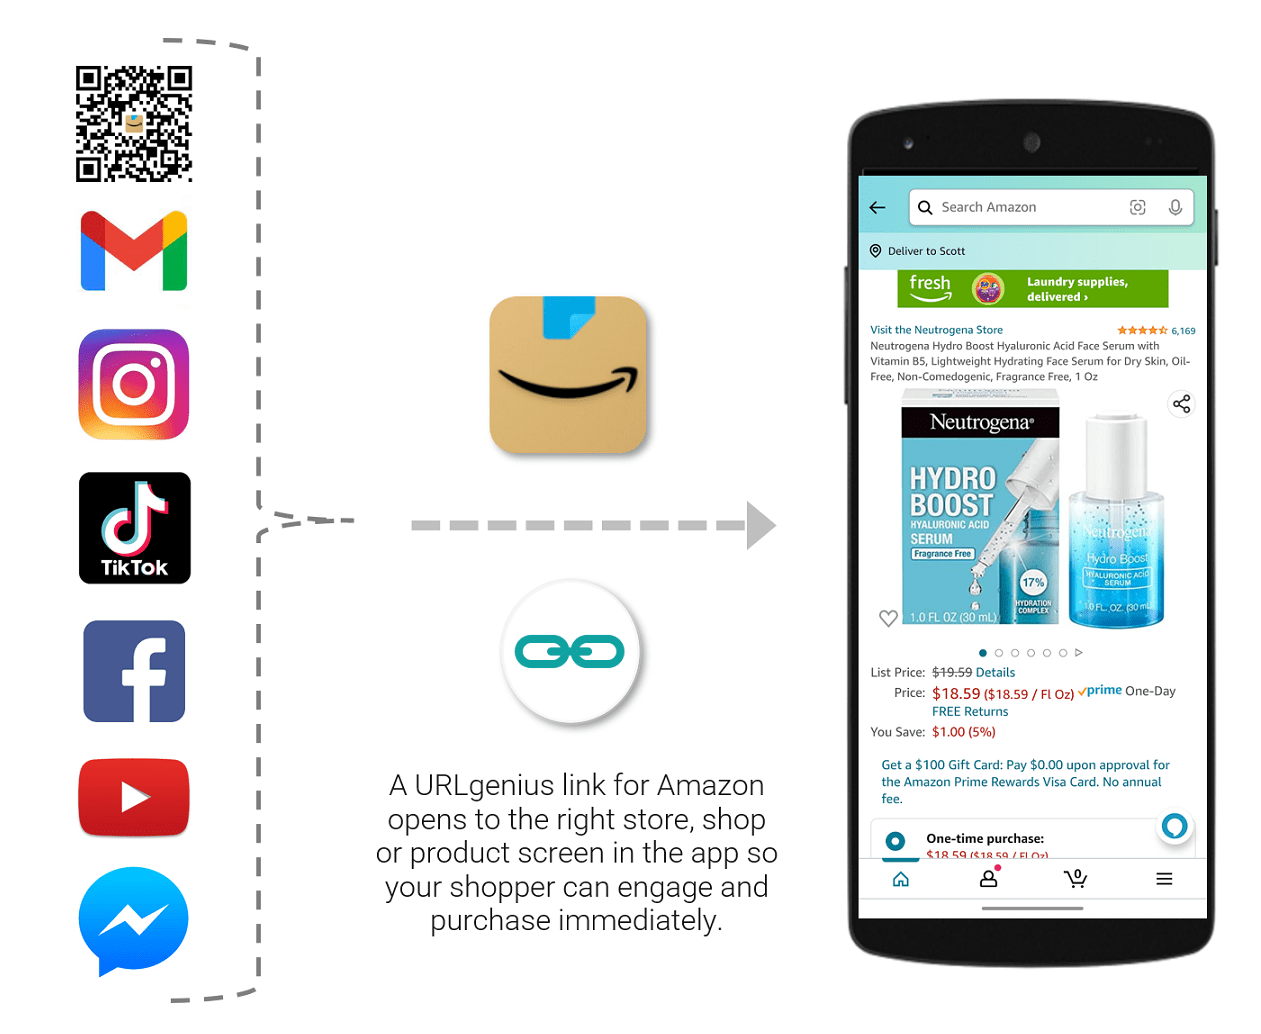 A URLgenius link for Amazon opens to the right store, shop, or product screen in the app so your shopper can engage and purchase immediately.